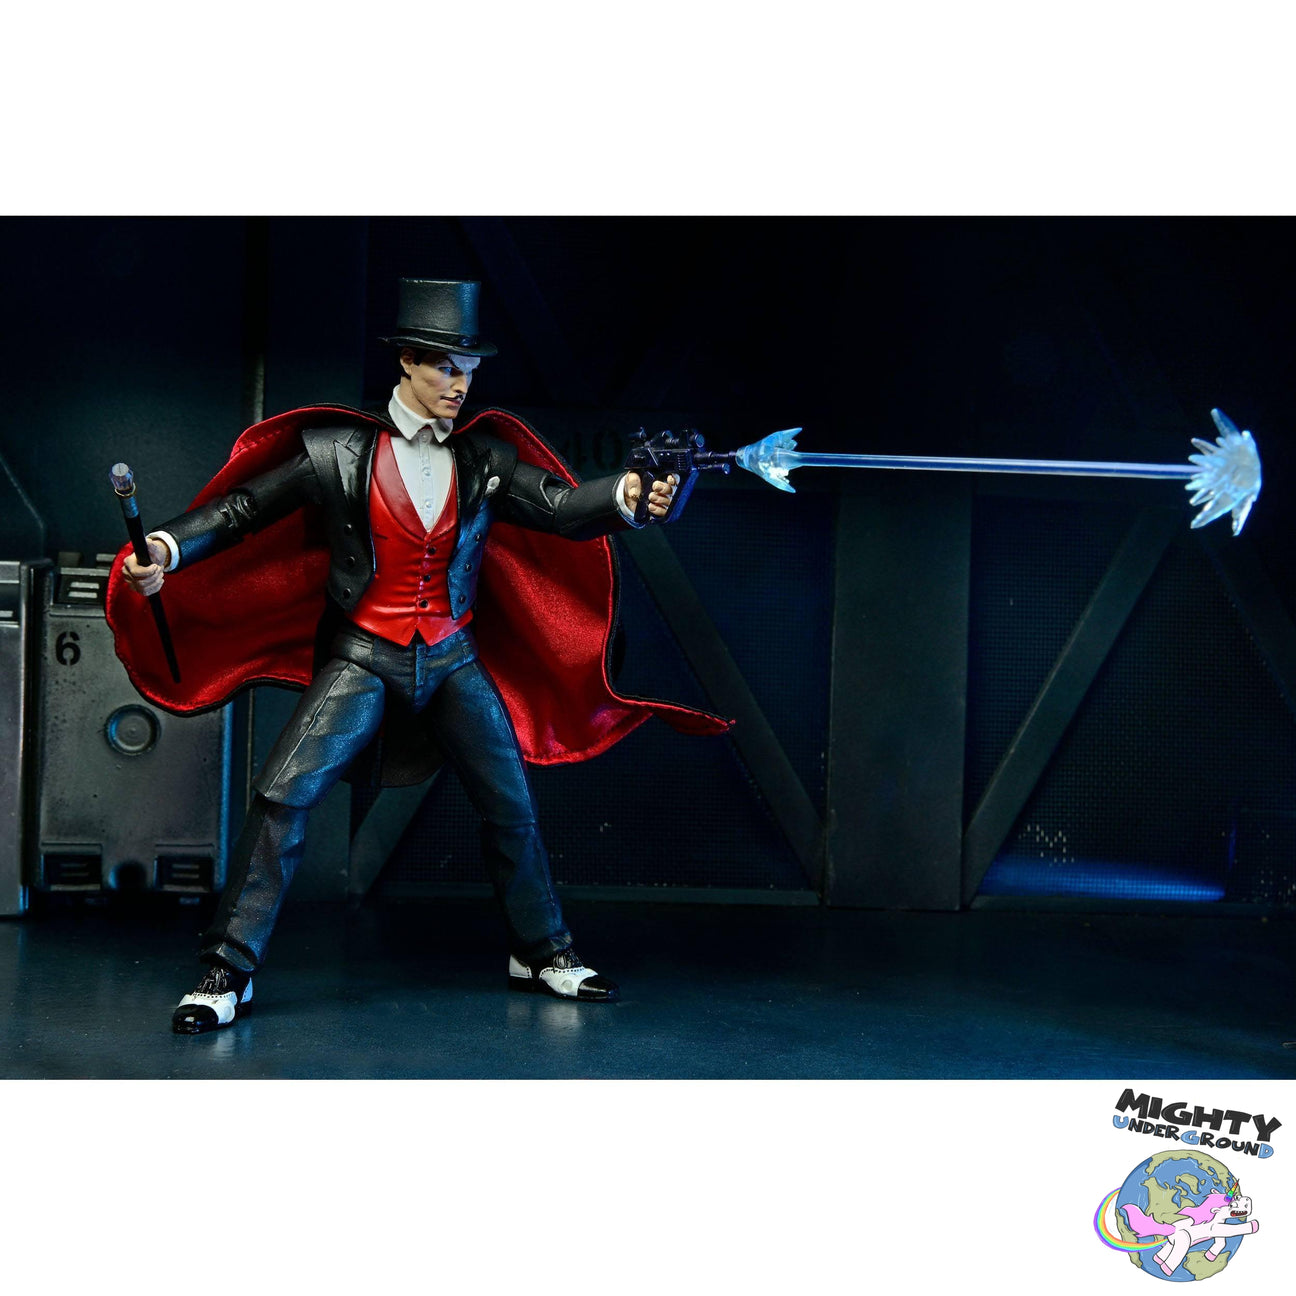 Defenders of the Earth: Lothar, Mandrake the Magician, Garax - Series 2 - 3-Pack-Actionfiguren-NECA-Mighty Underground